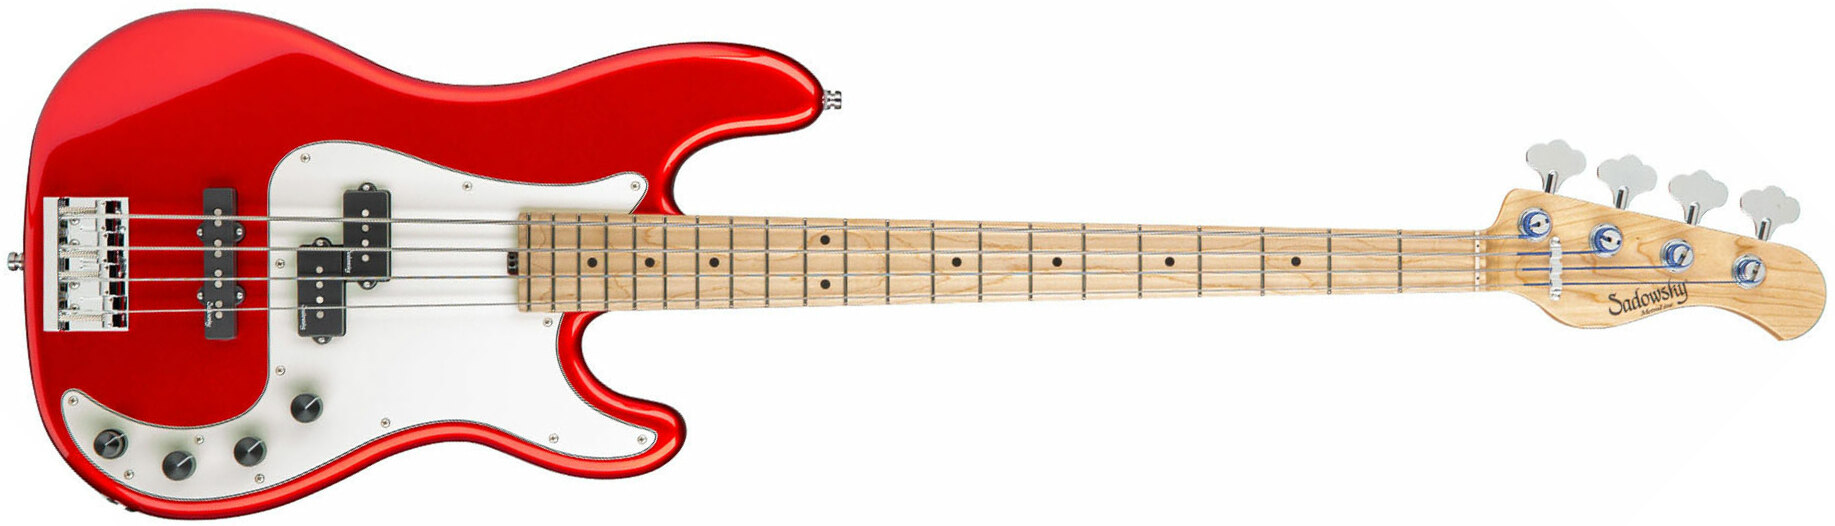 Sadowsky Hybrid P/j Bass 21 Fret Ash 4c Metroline All Active Mn - Solid Candy Apple Red - Solid body electric bass - Main picture